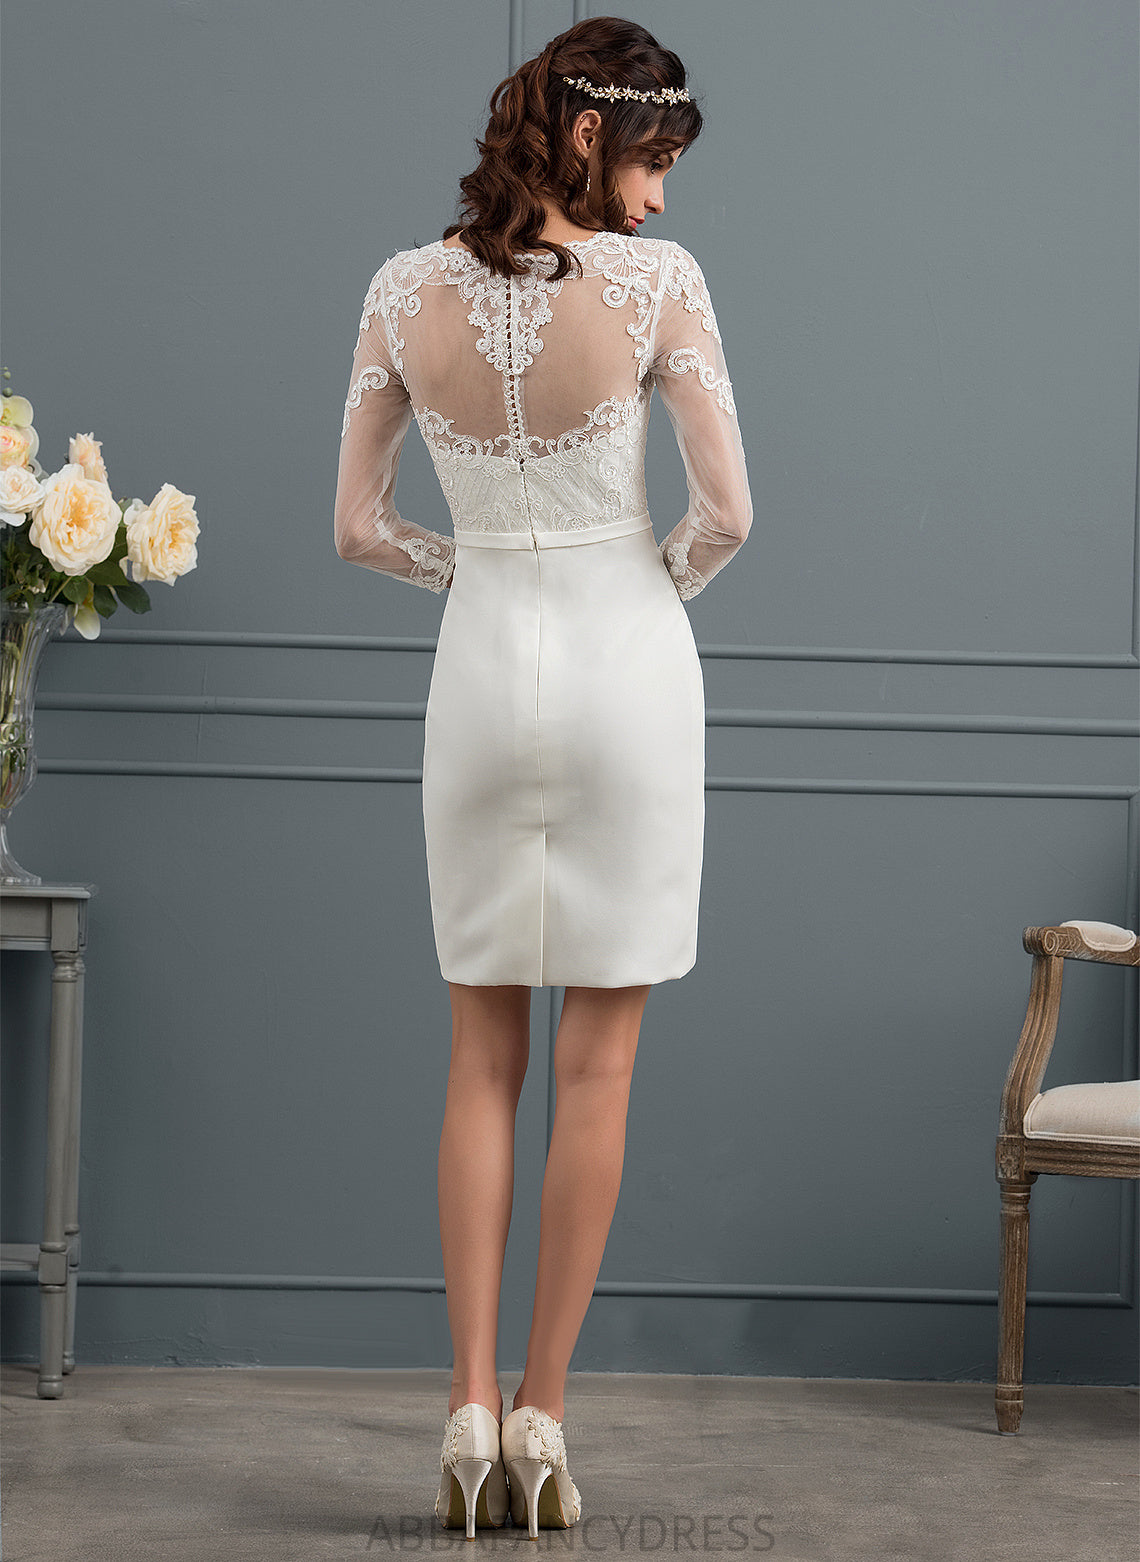 Lace Sheath/Column Knee-Length Dress Wedding Dresses Sequins Lilly Illusion With Wedding Bow(s)